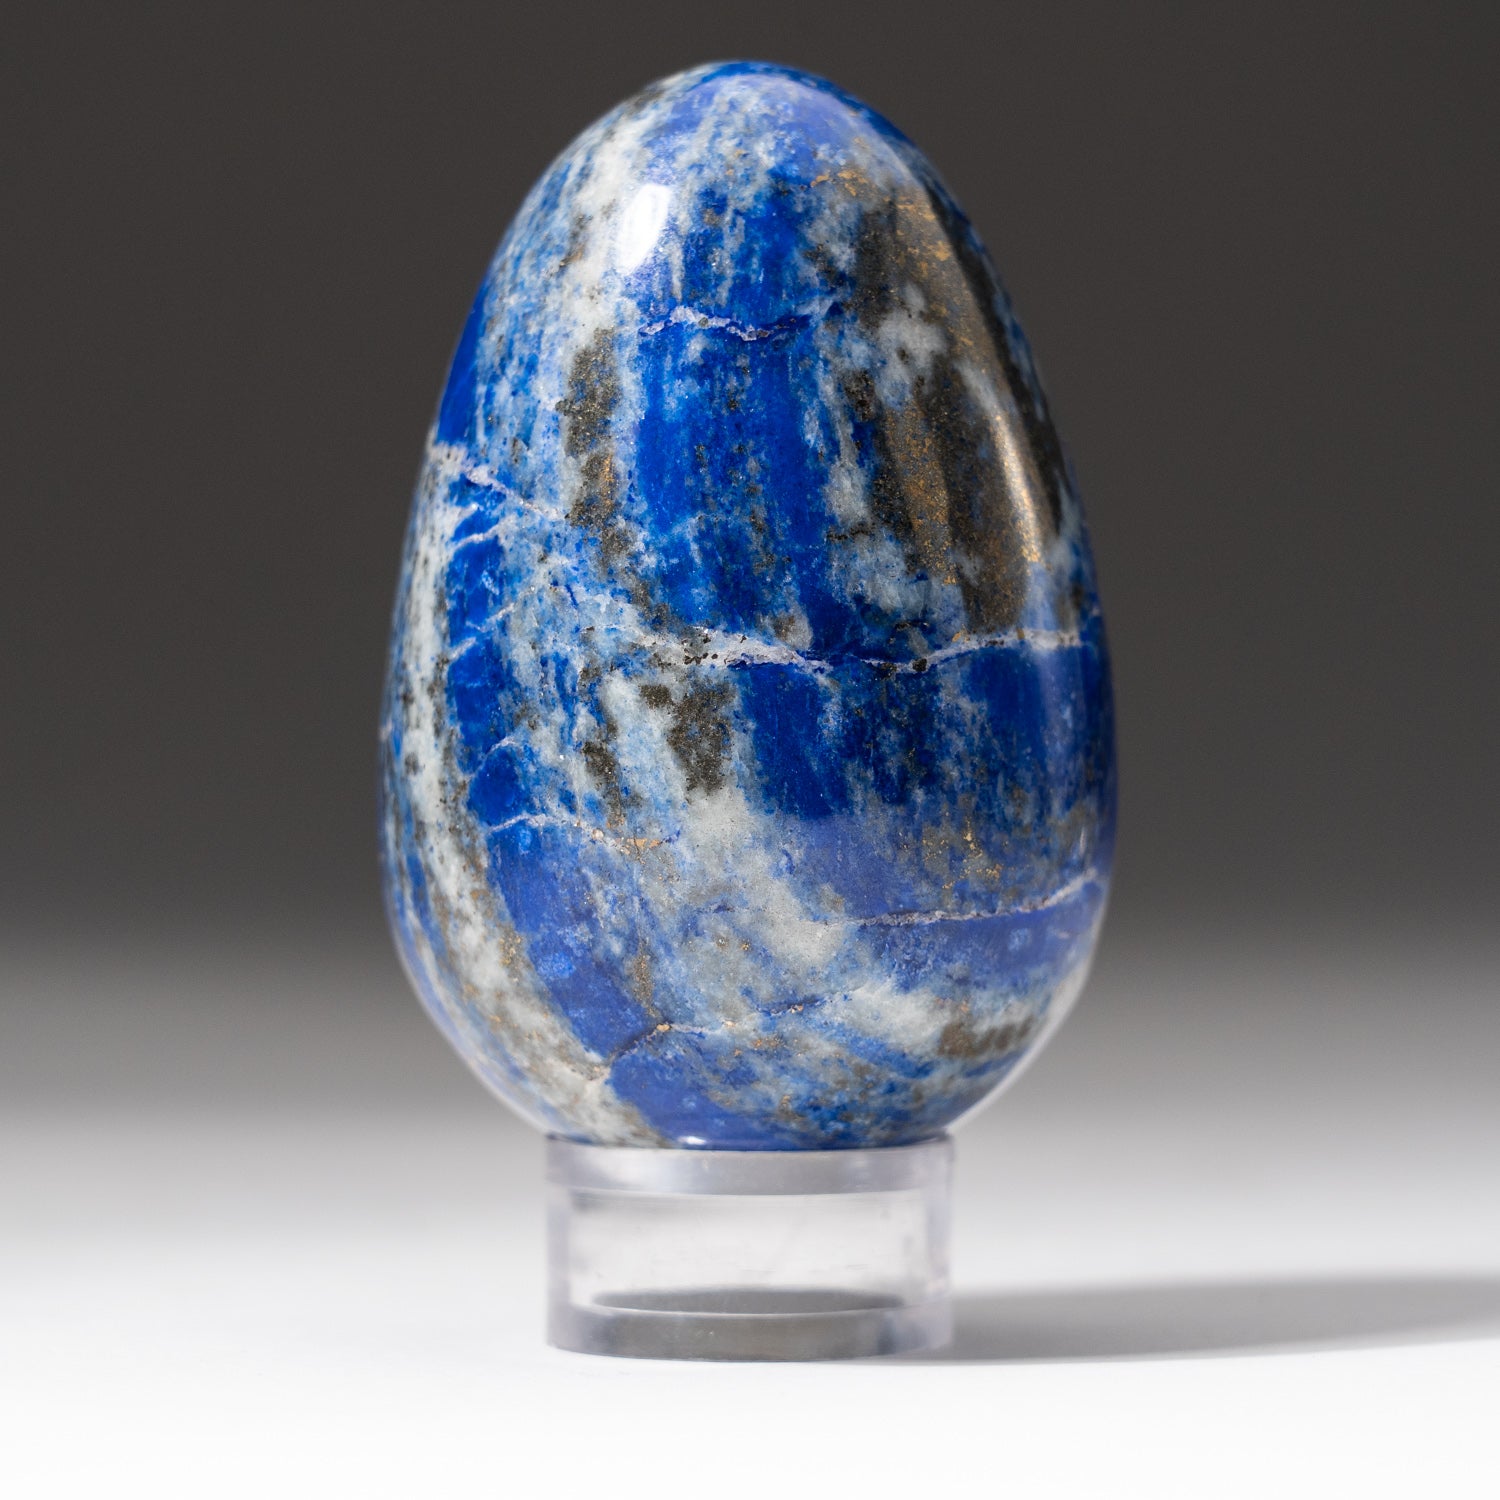 Polished Lapis Lazuli Egg from Afghanistan (235.4 grams)